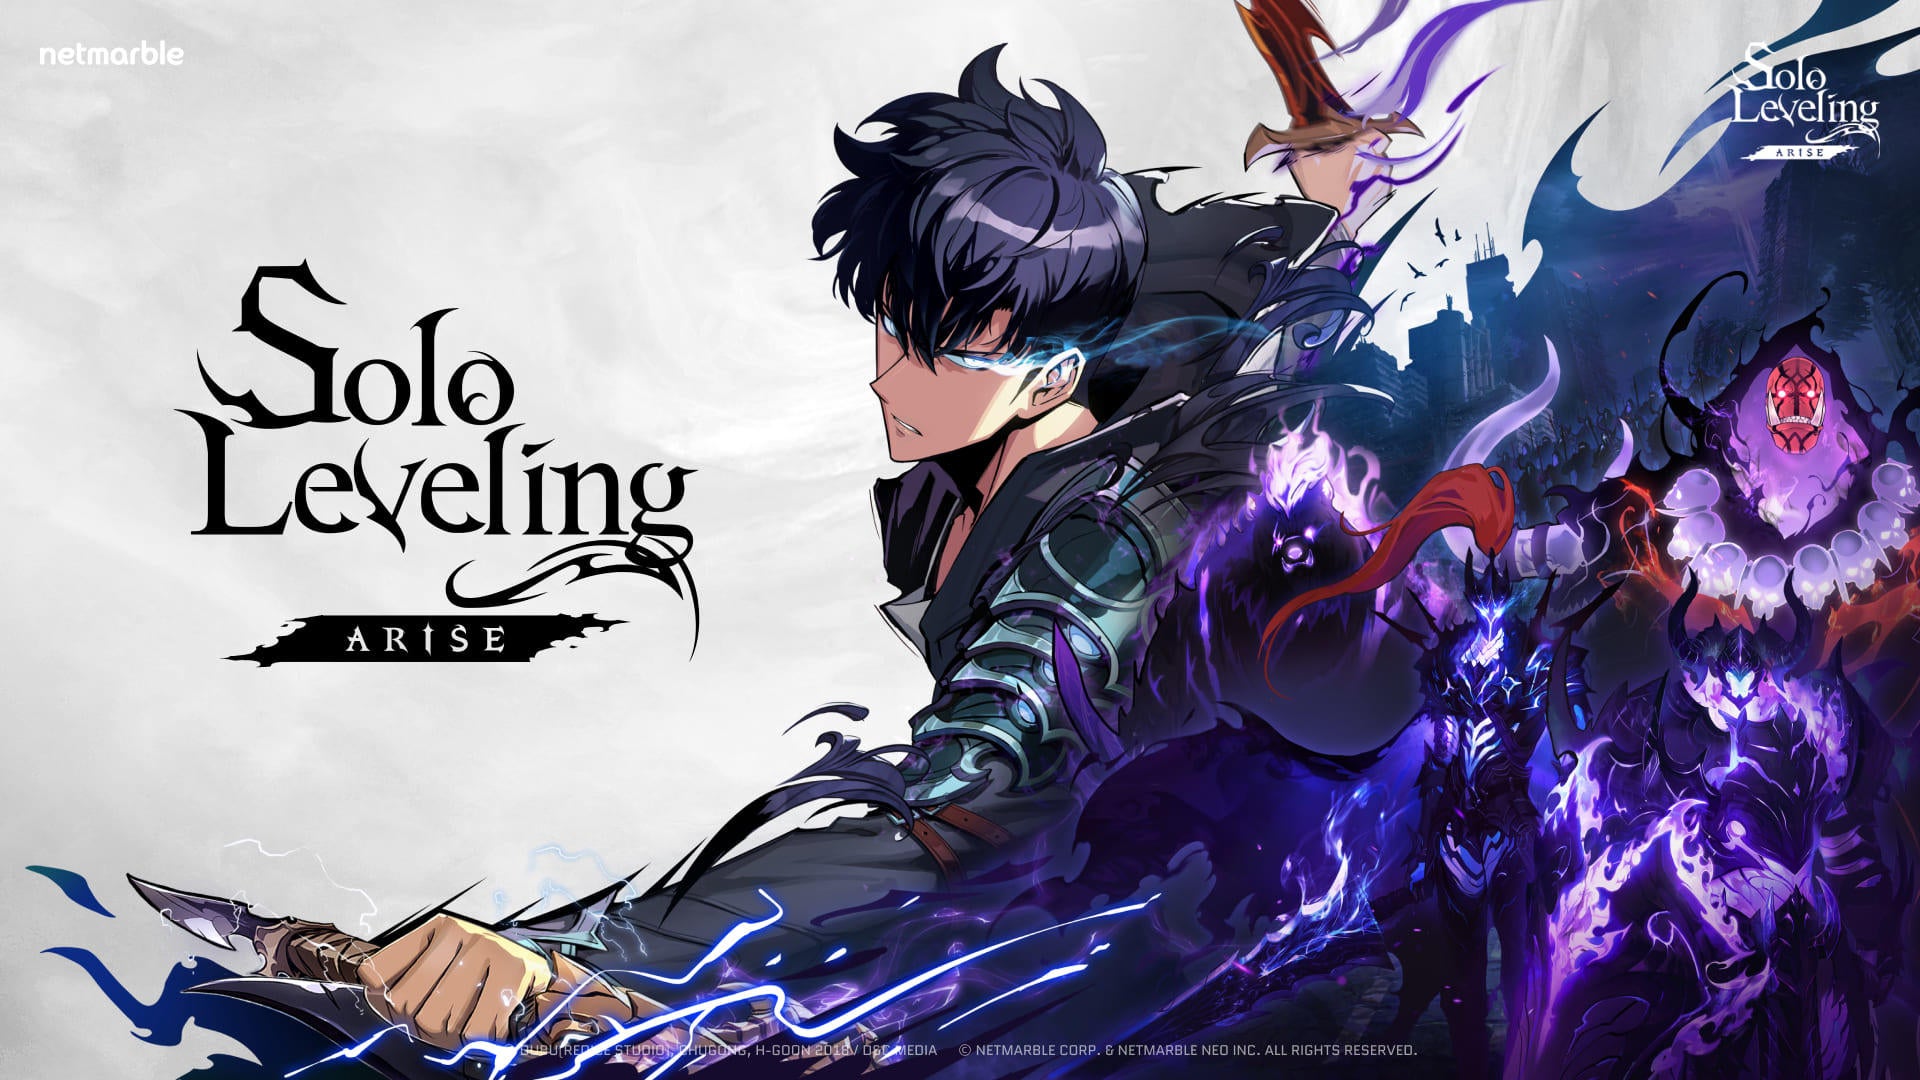 Solo Leveling: ARISE Sets Global Launch Date